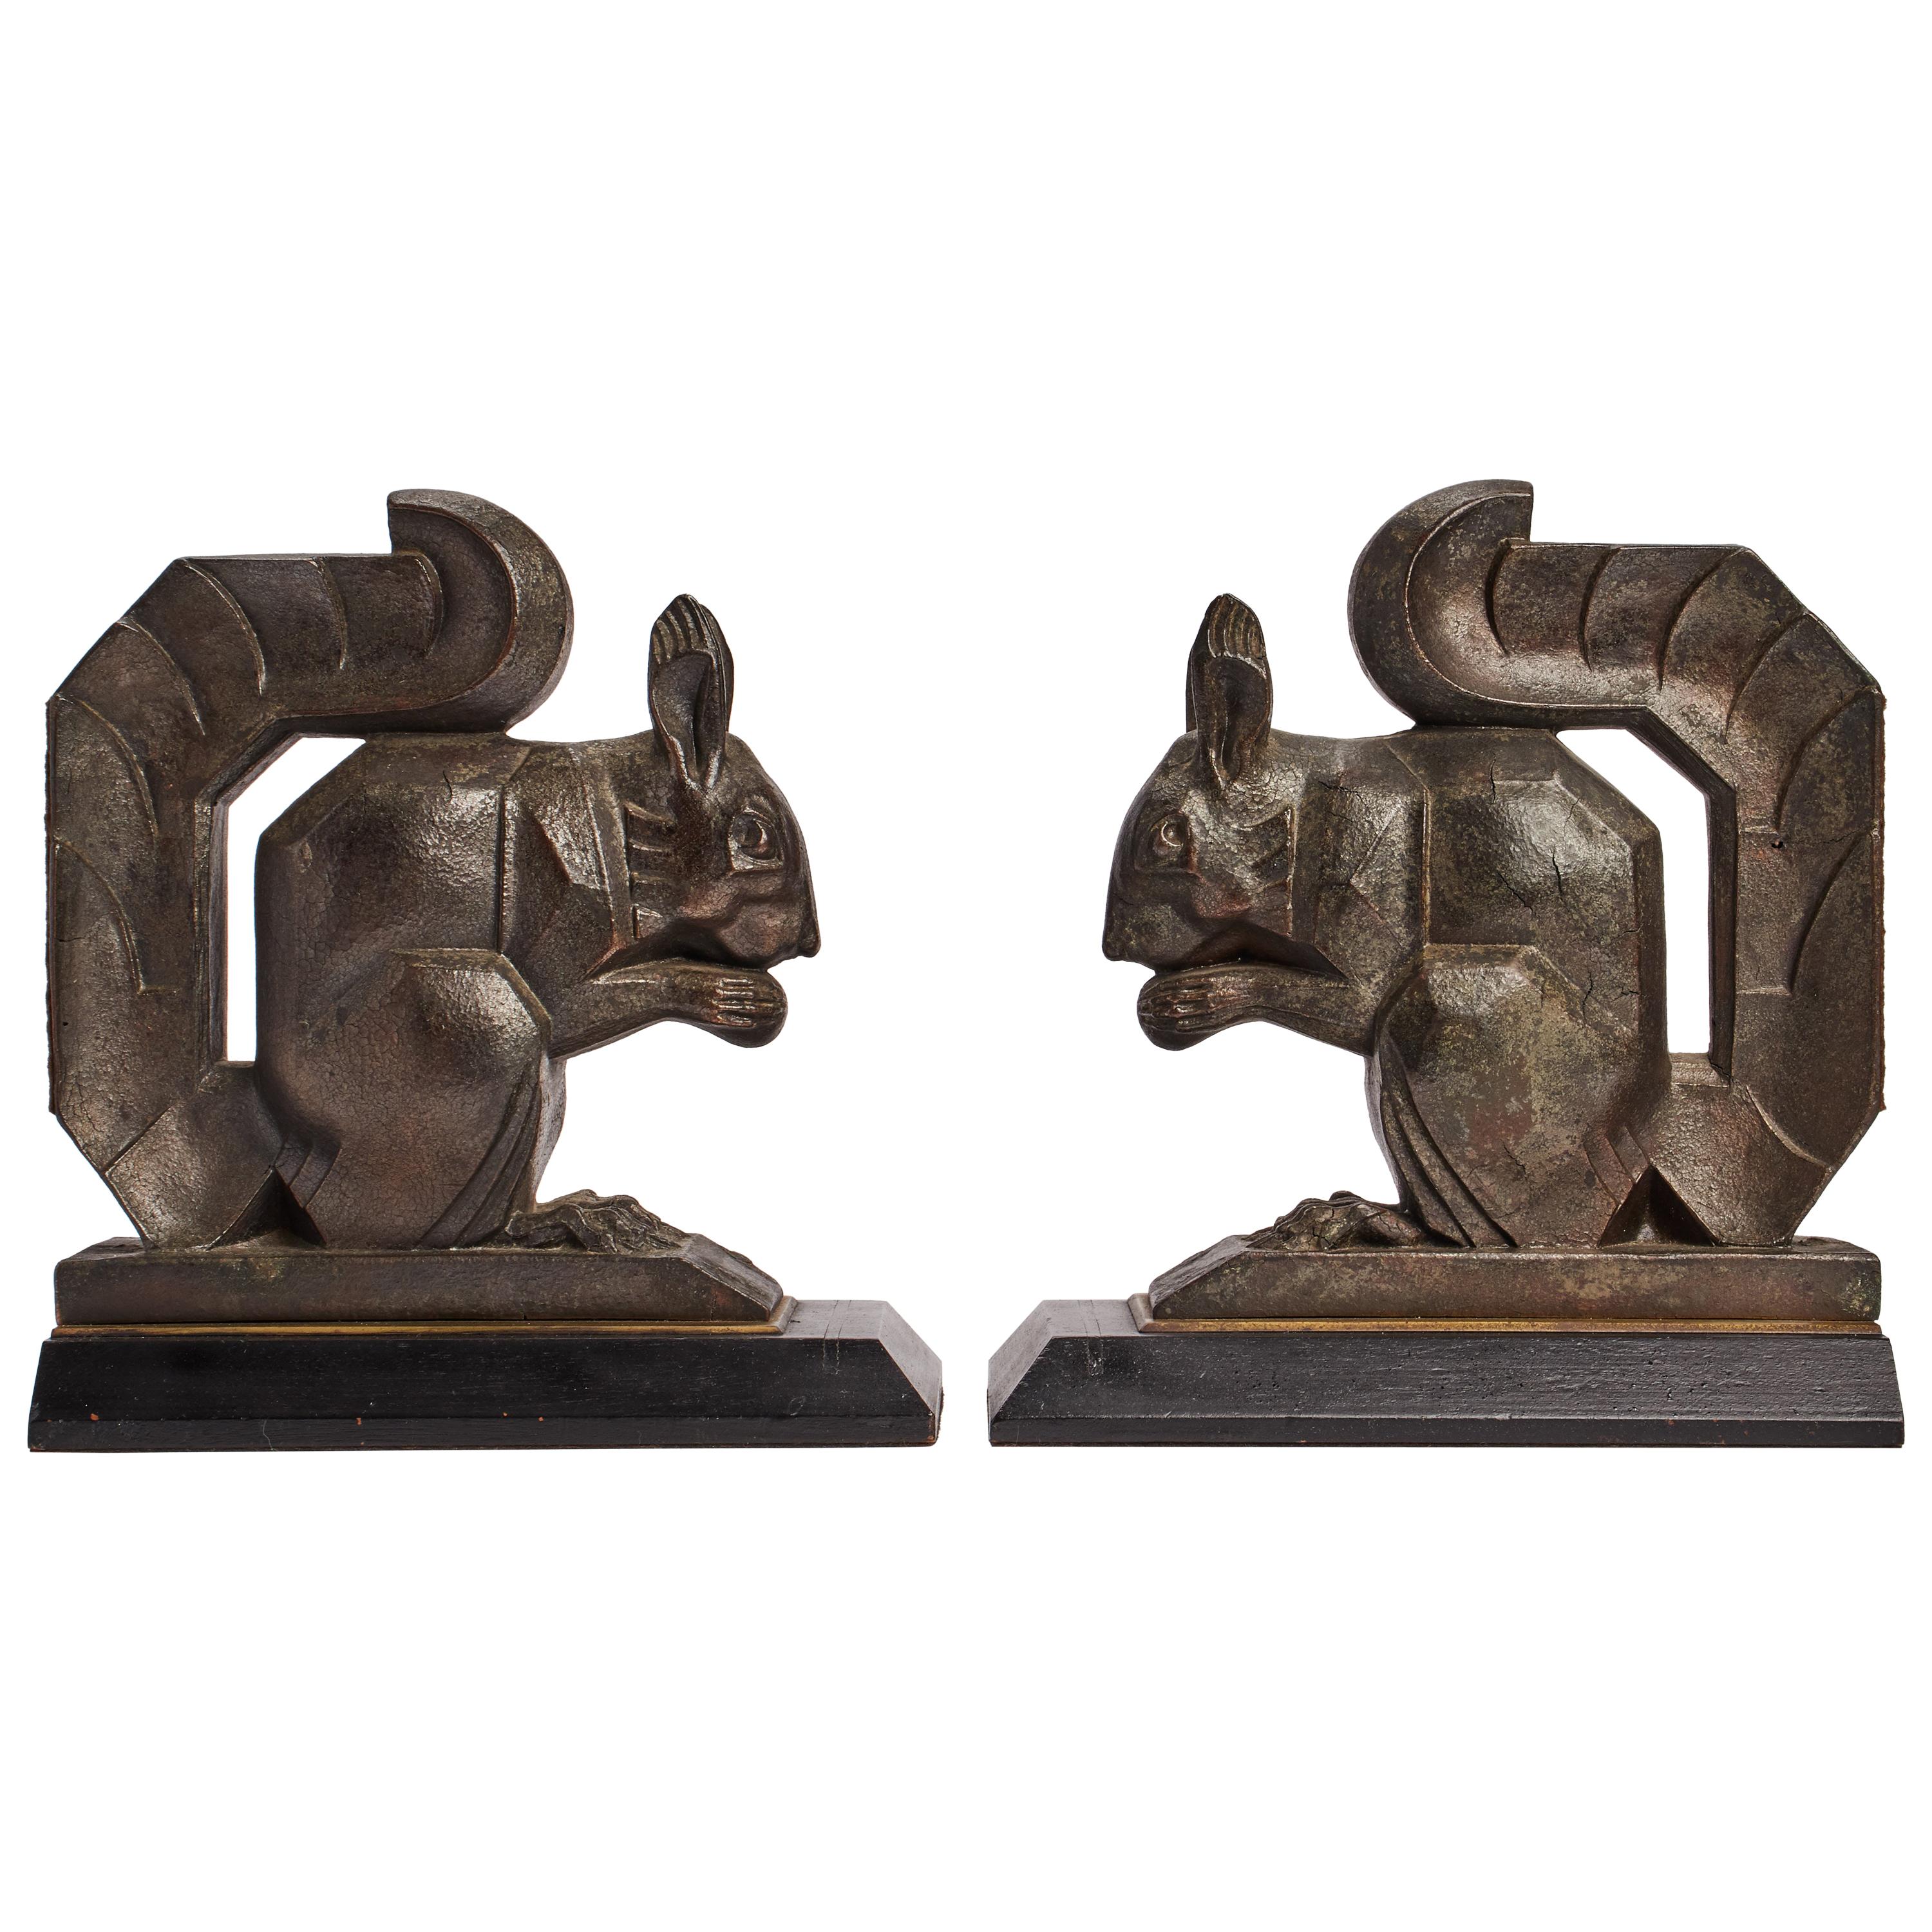 Pair of Deco Squirrel Bookends, France, 1930